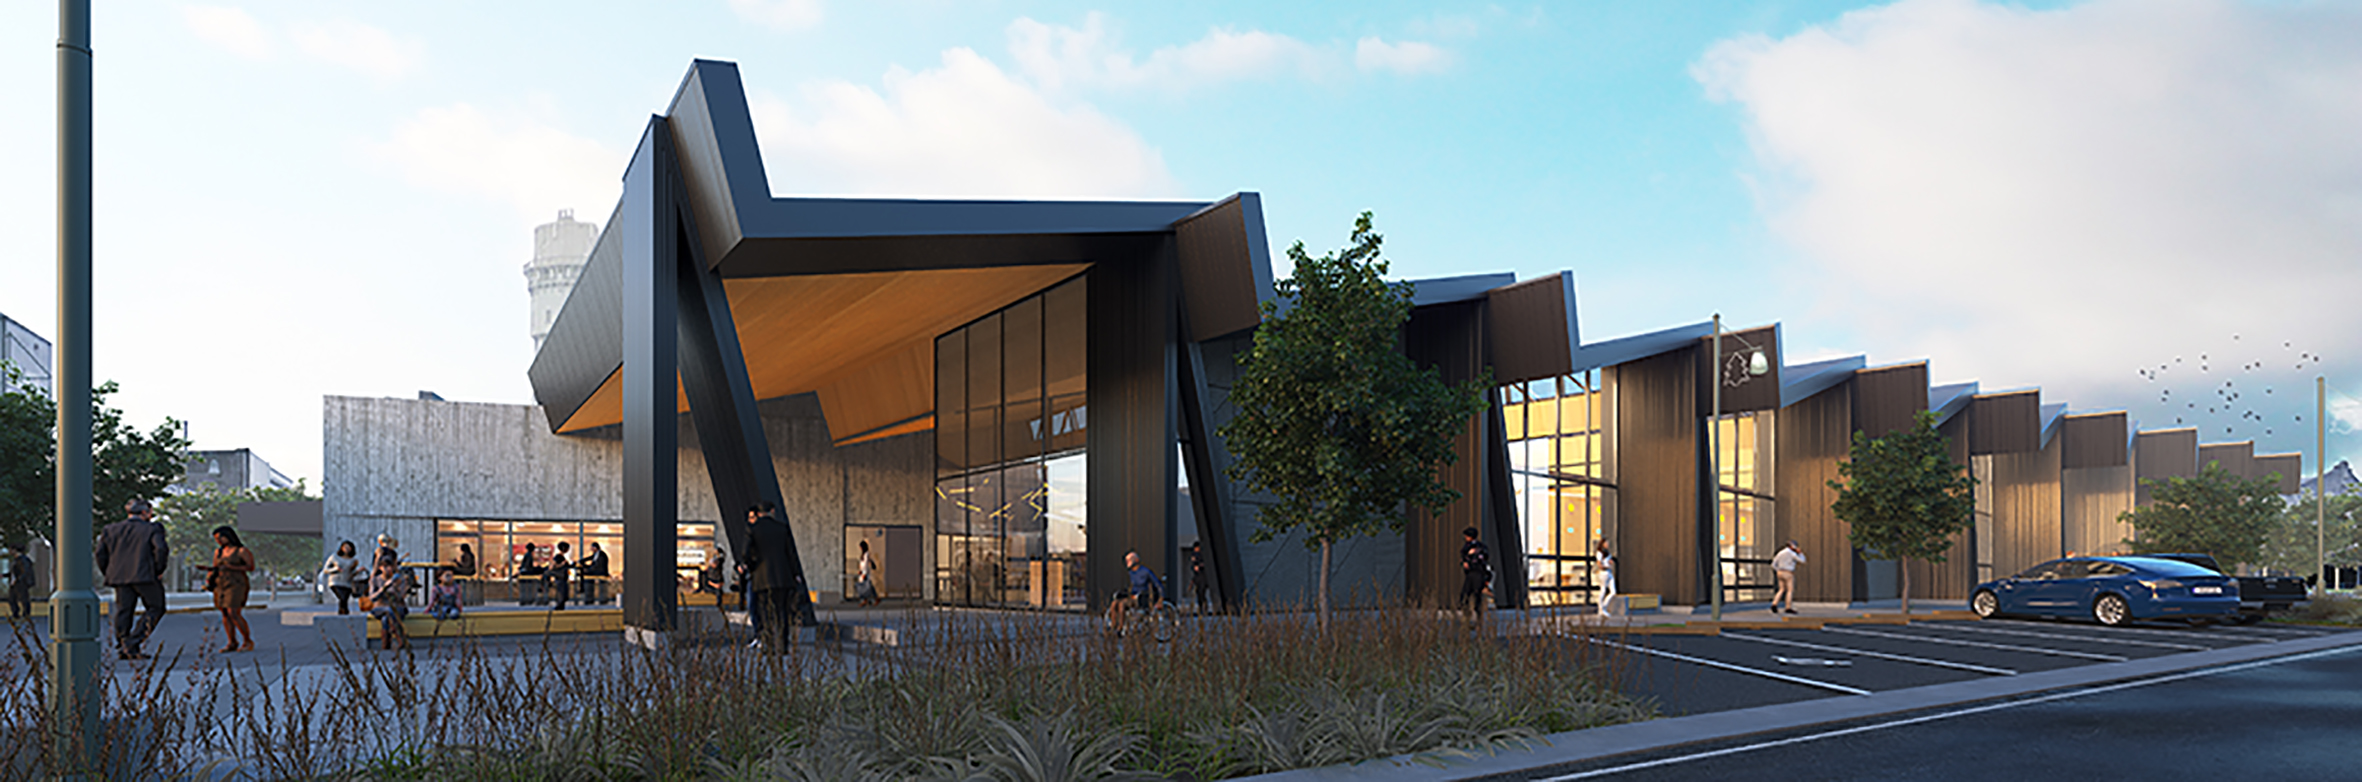 Artist’s impression of Te Ramanui o Ruapūtahanga, the district’s new Library, arts and culture centre, construction of which is due to start next week.